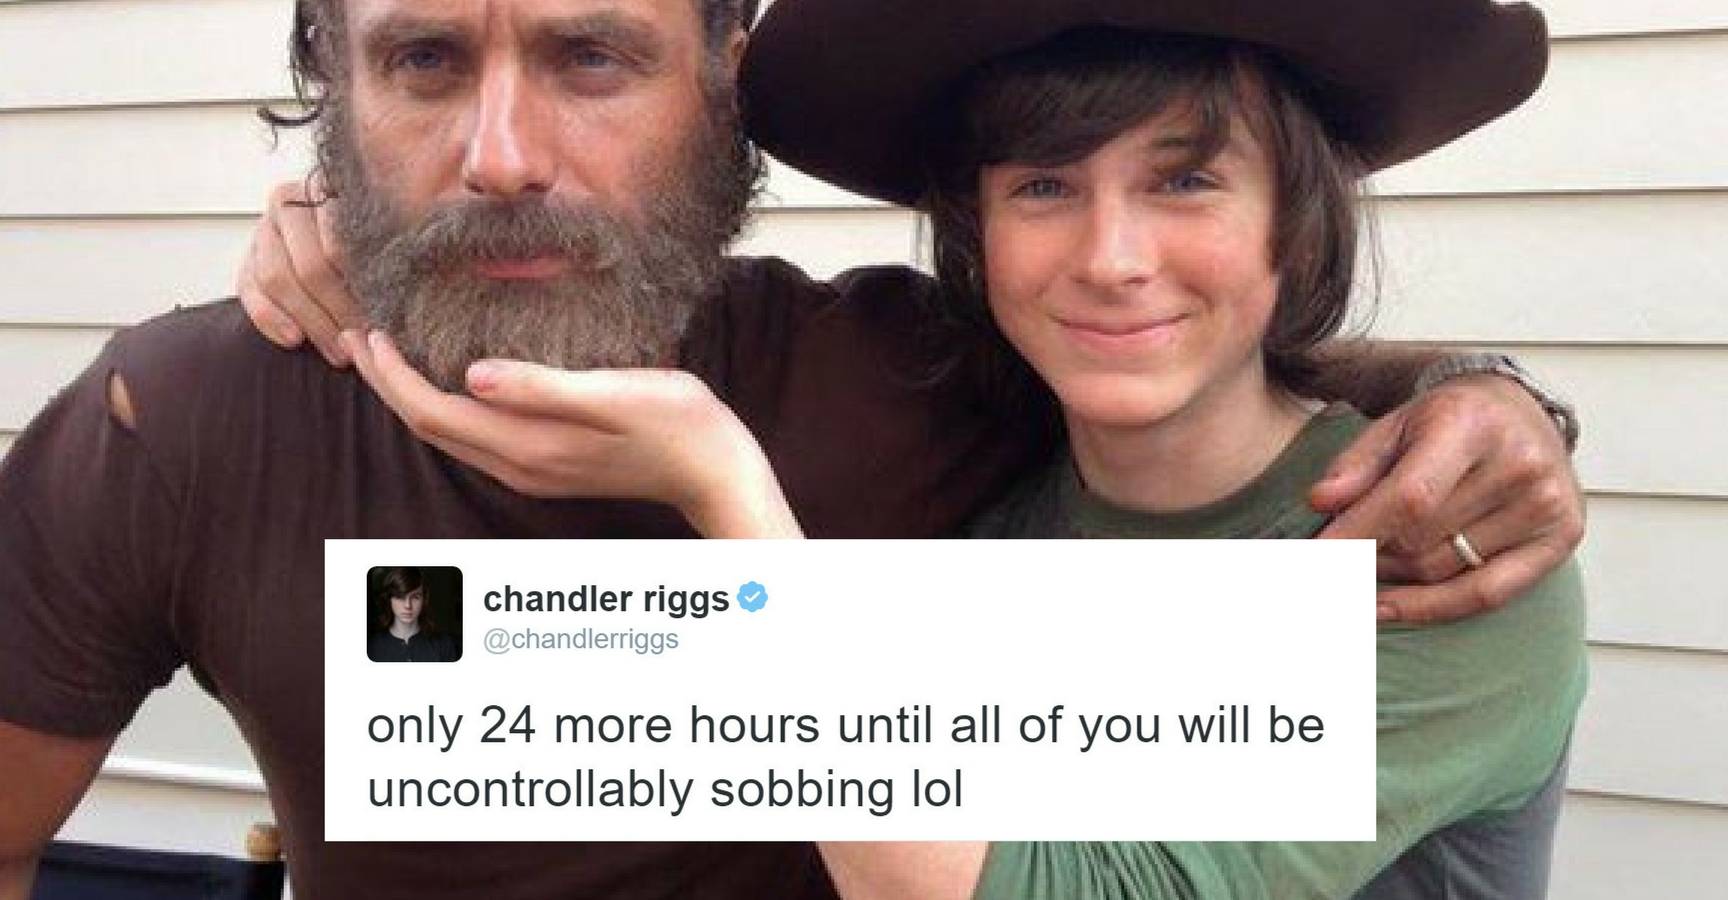 Is chandler riggs gay